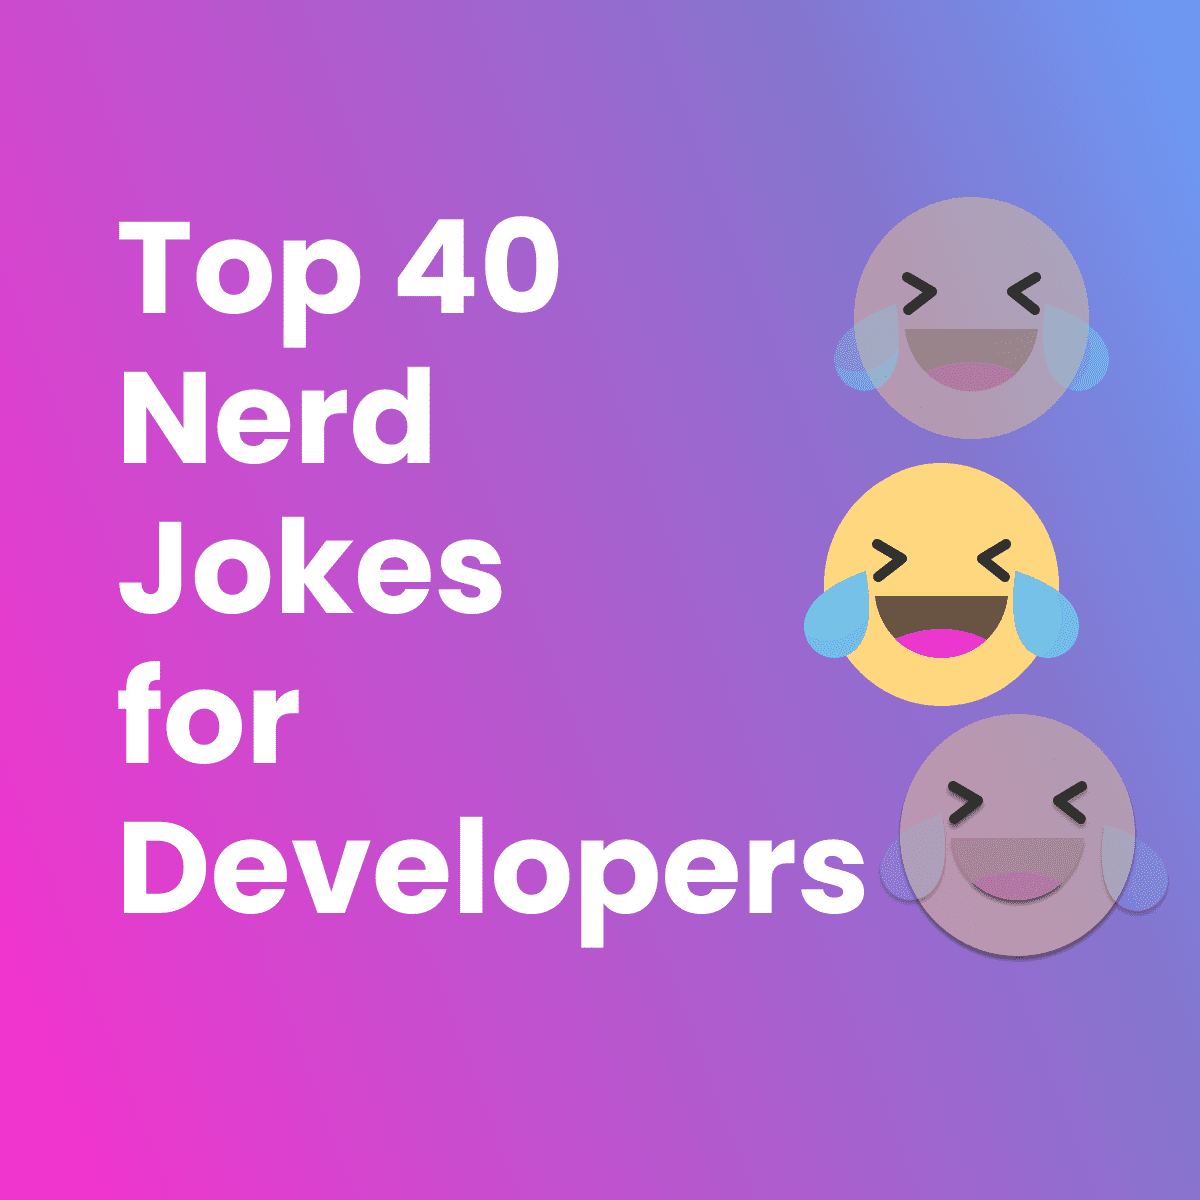 Top 40 Nerd Jokes for Programmers to Liven Up Your Day [Golden Collection]